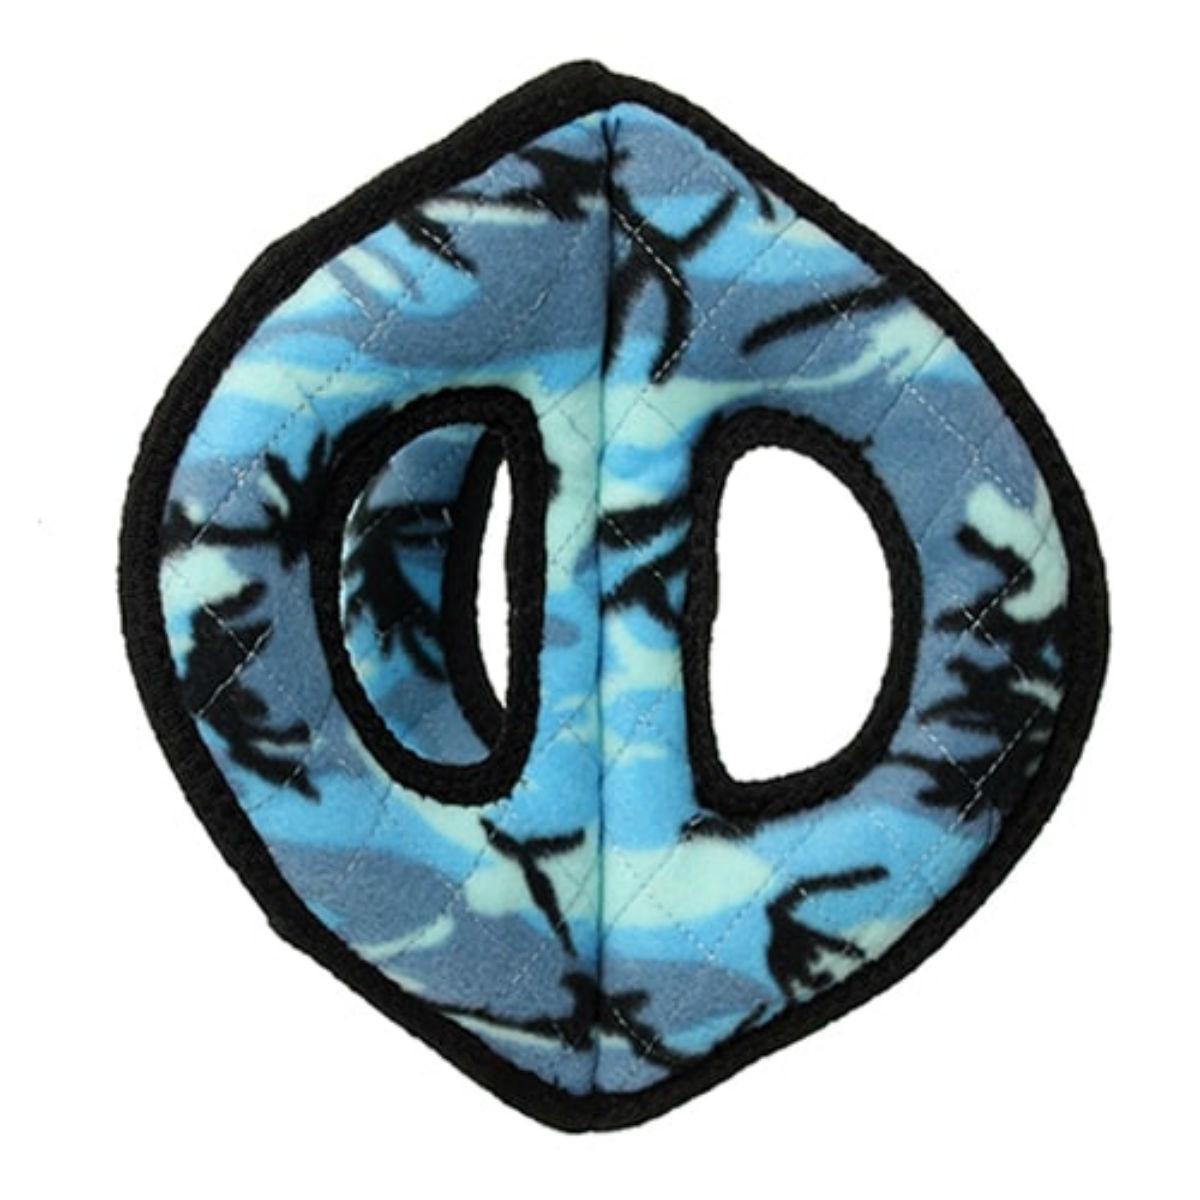 Tuffy Ultimate 3-Way Ring Dog Toy - Camo Blue